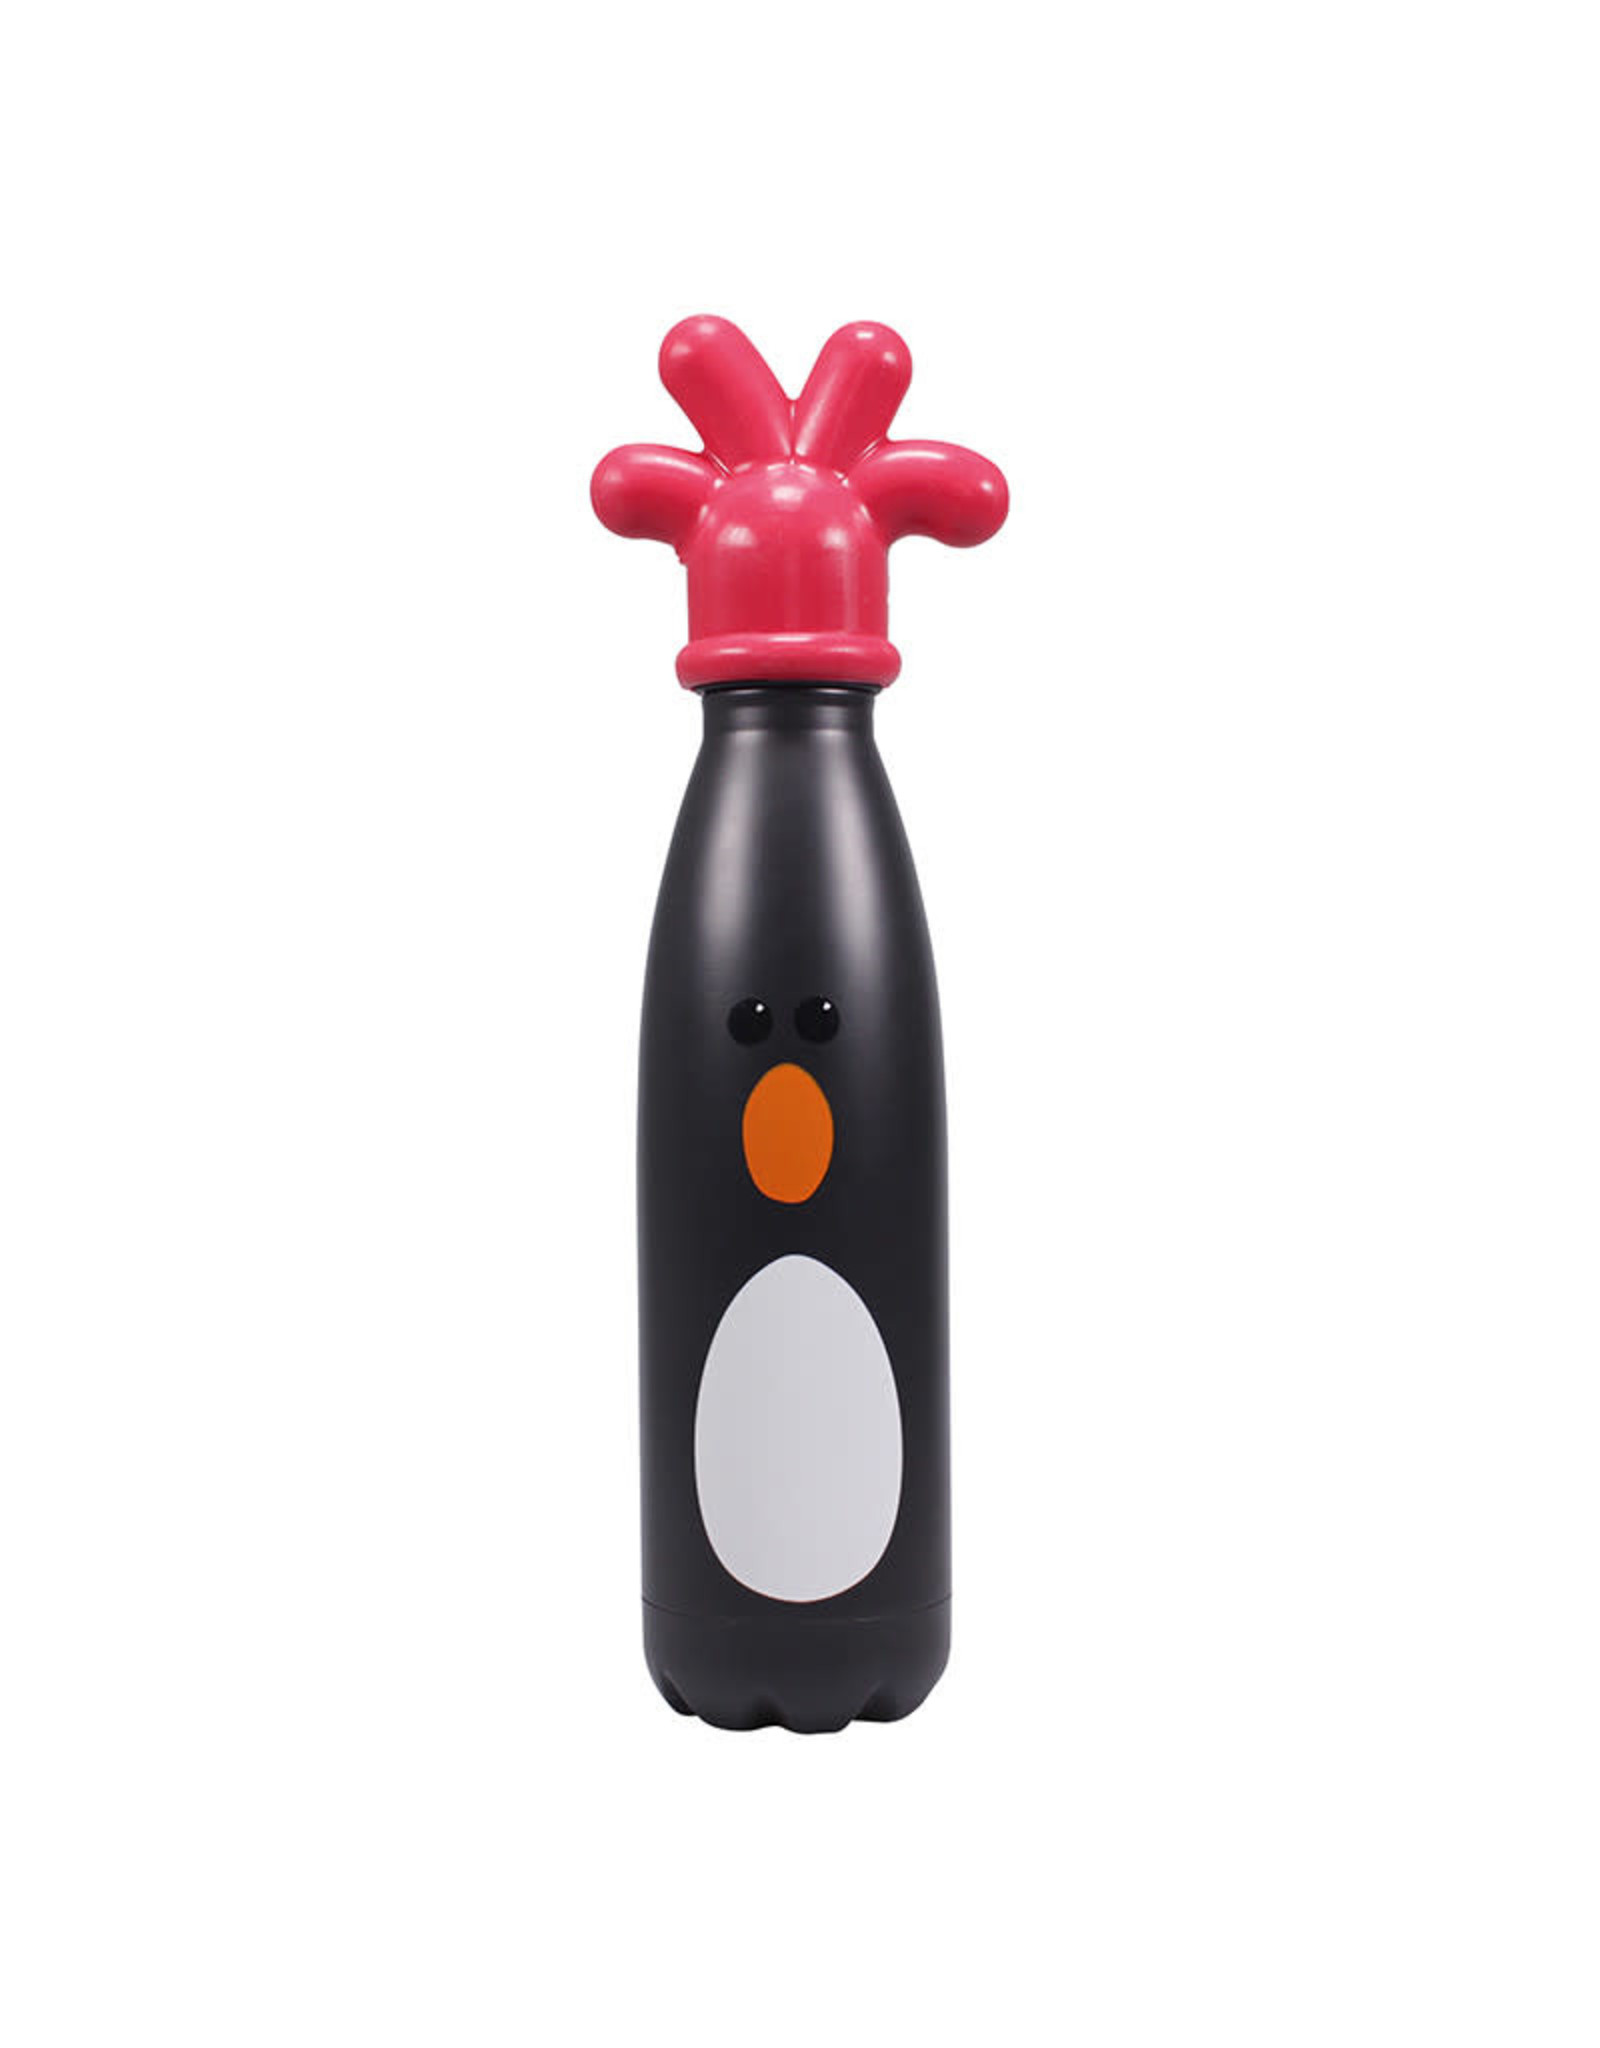 Half Moon Bay WALLACE & GROMIT Water Bottle - Feathers McGraw